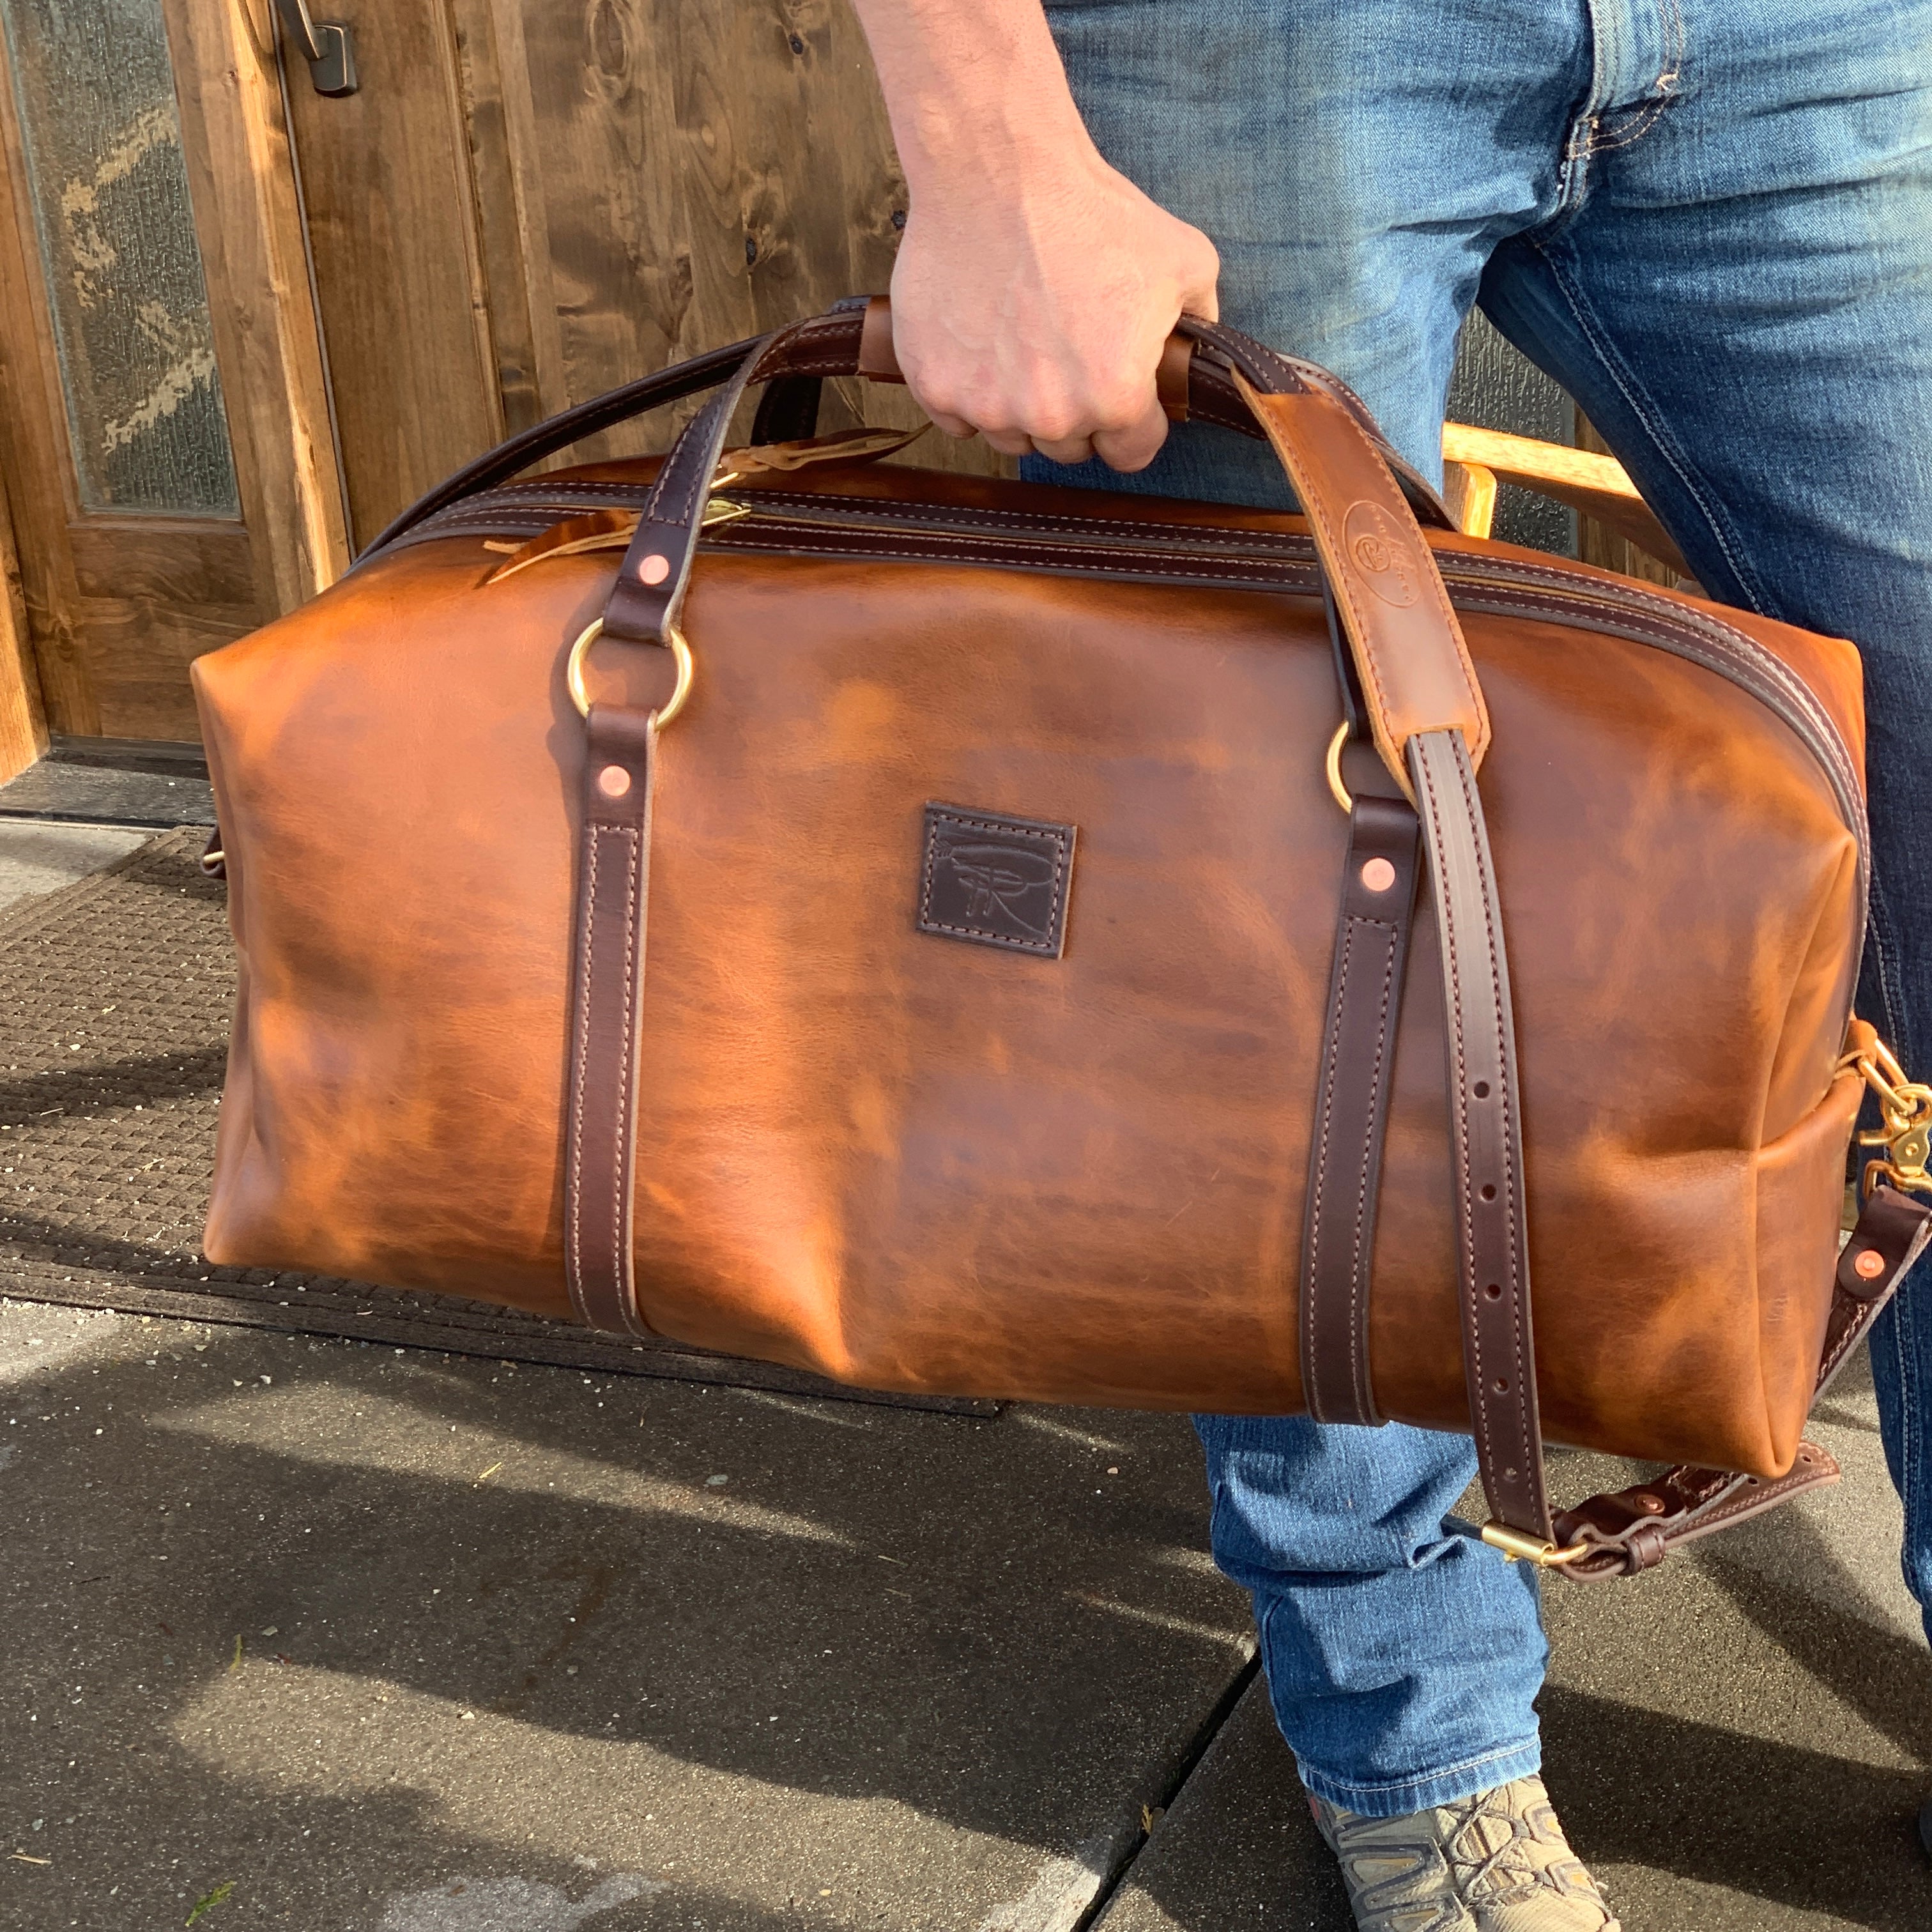 leather shop handbags duffel bag handcrafted coeur d'alene idaho north western store ranch shop dude ranch jewelry turquoise fly fishing boutique hunting gear